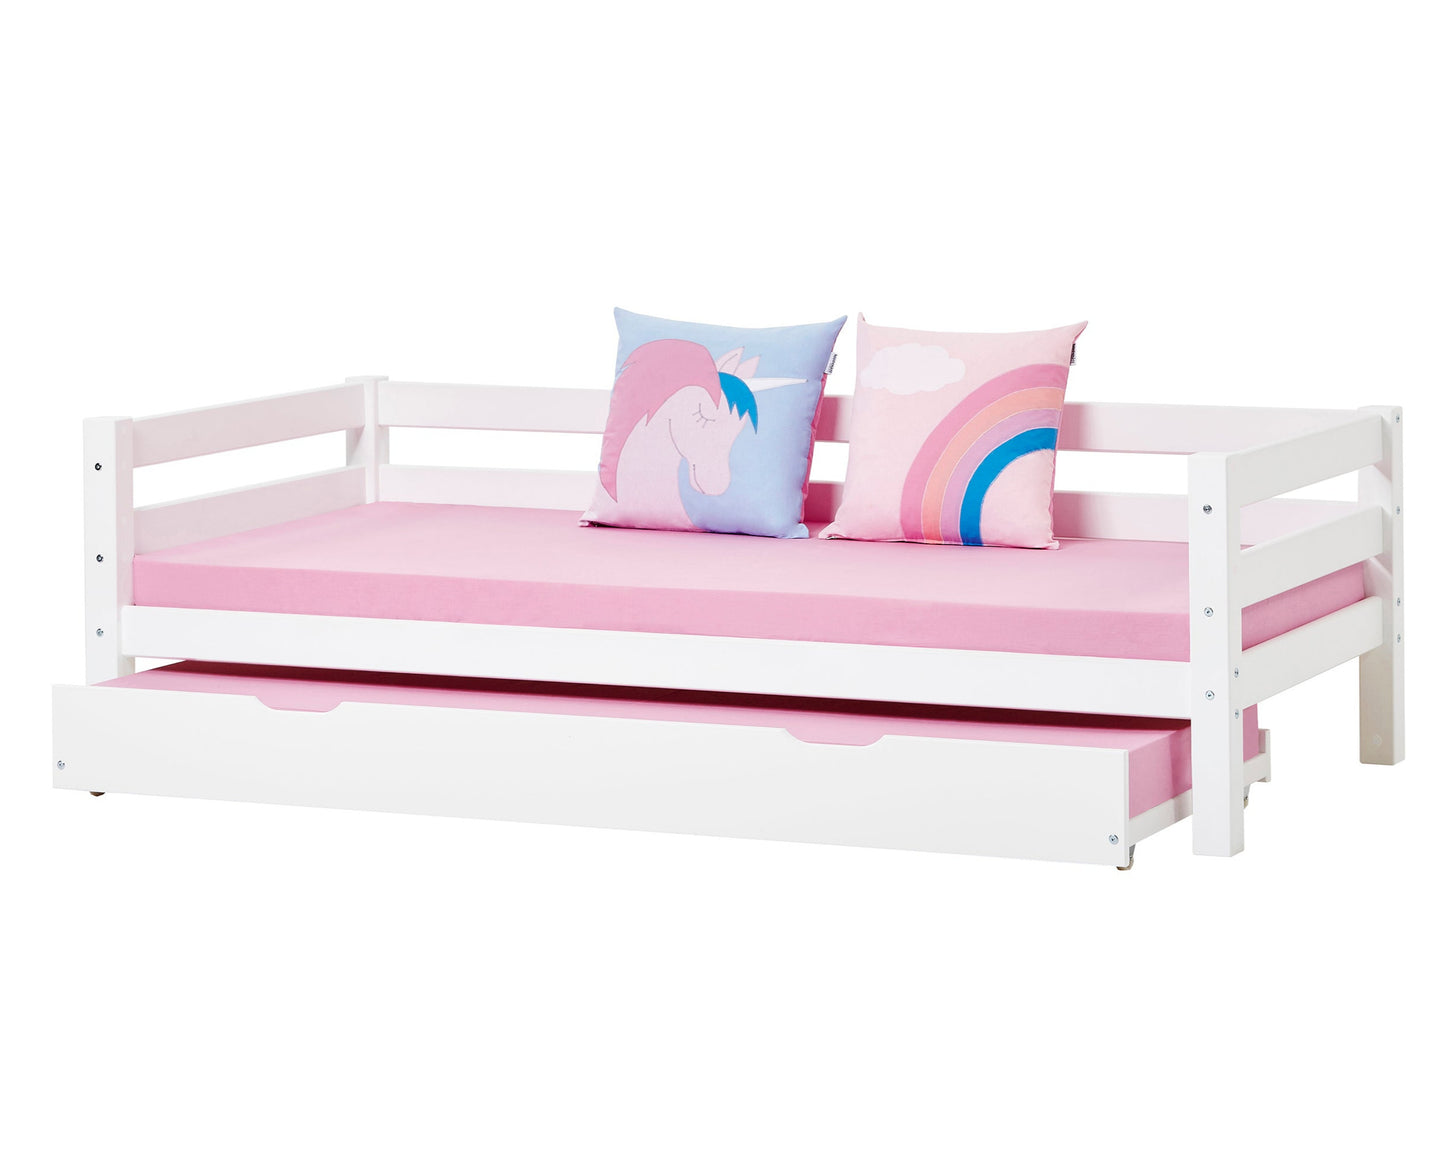 ECO Luxury - Junior bed with backrest - 90x200cm - white